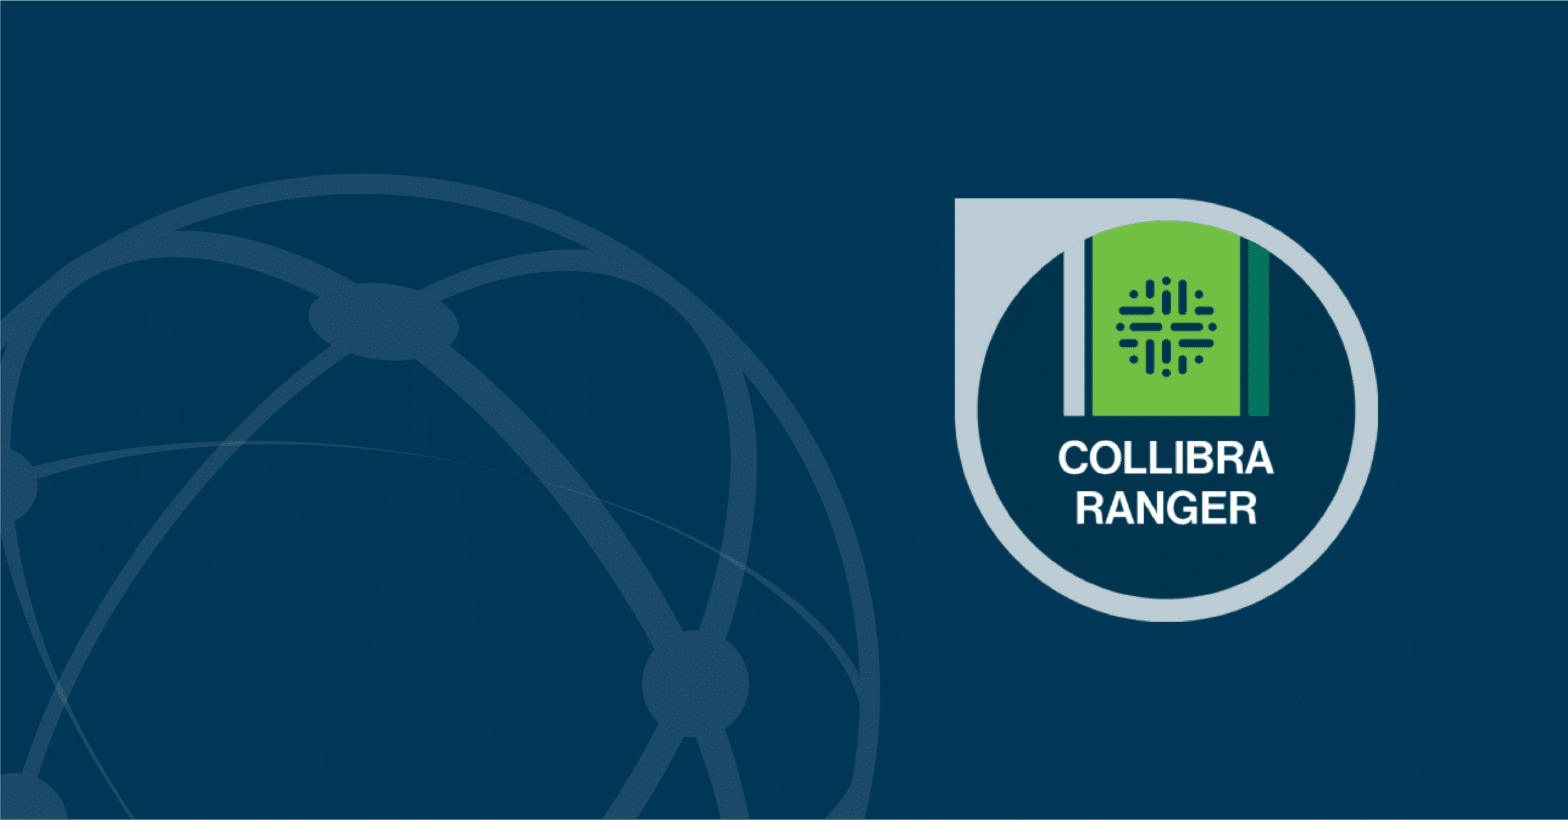 Collibra Rangers: Empowering Businesses with Next-Level Data Governance